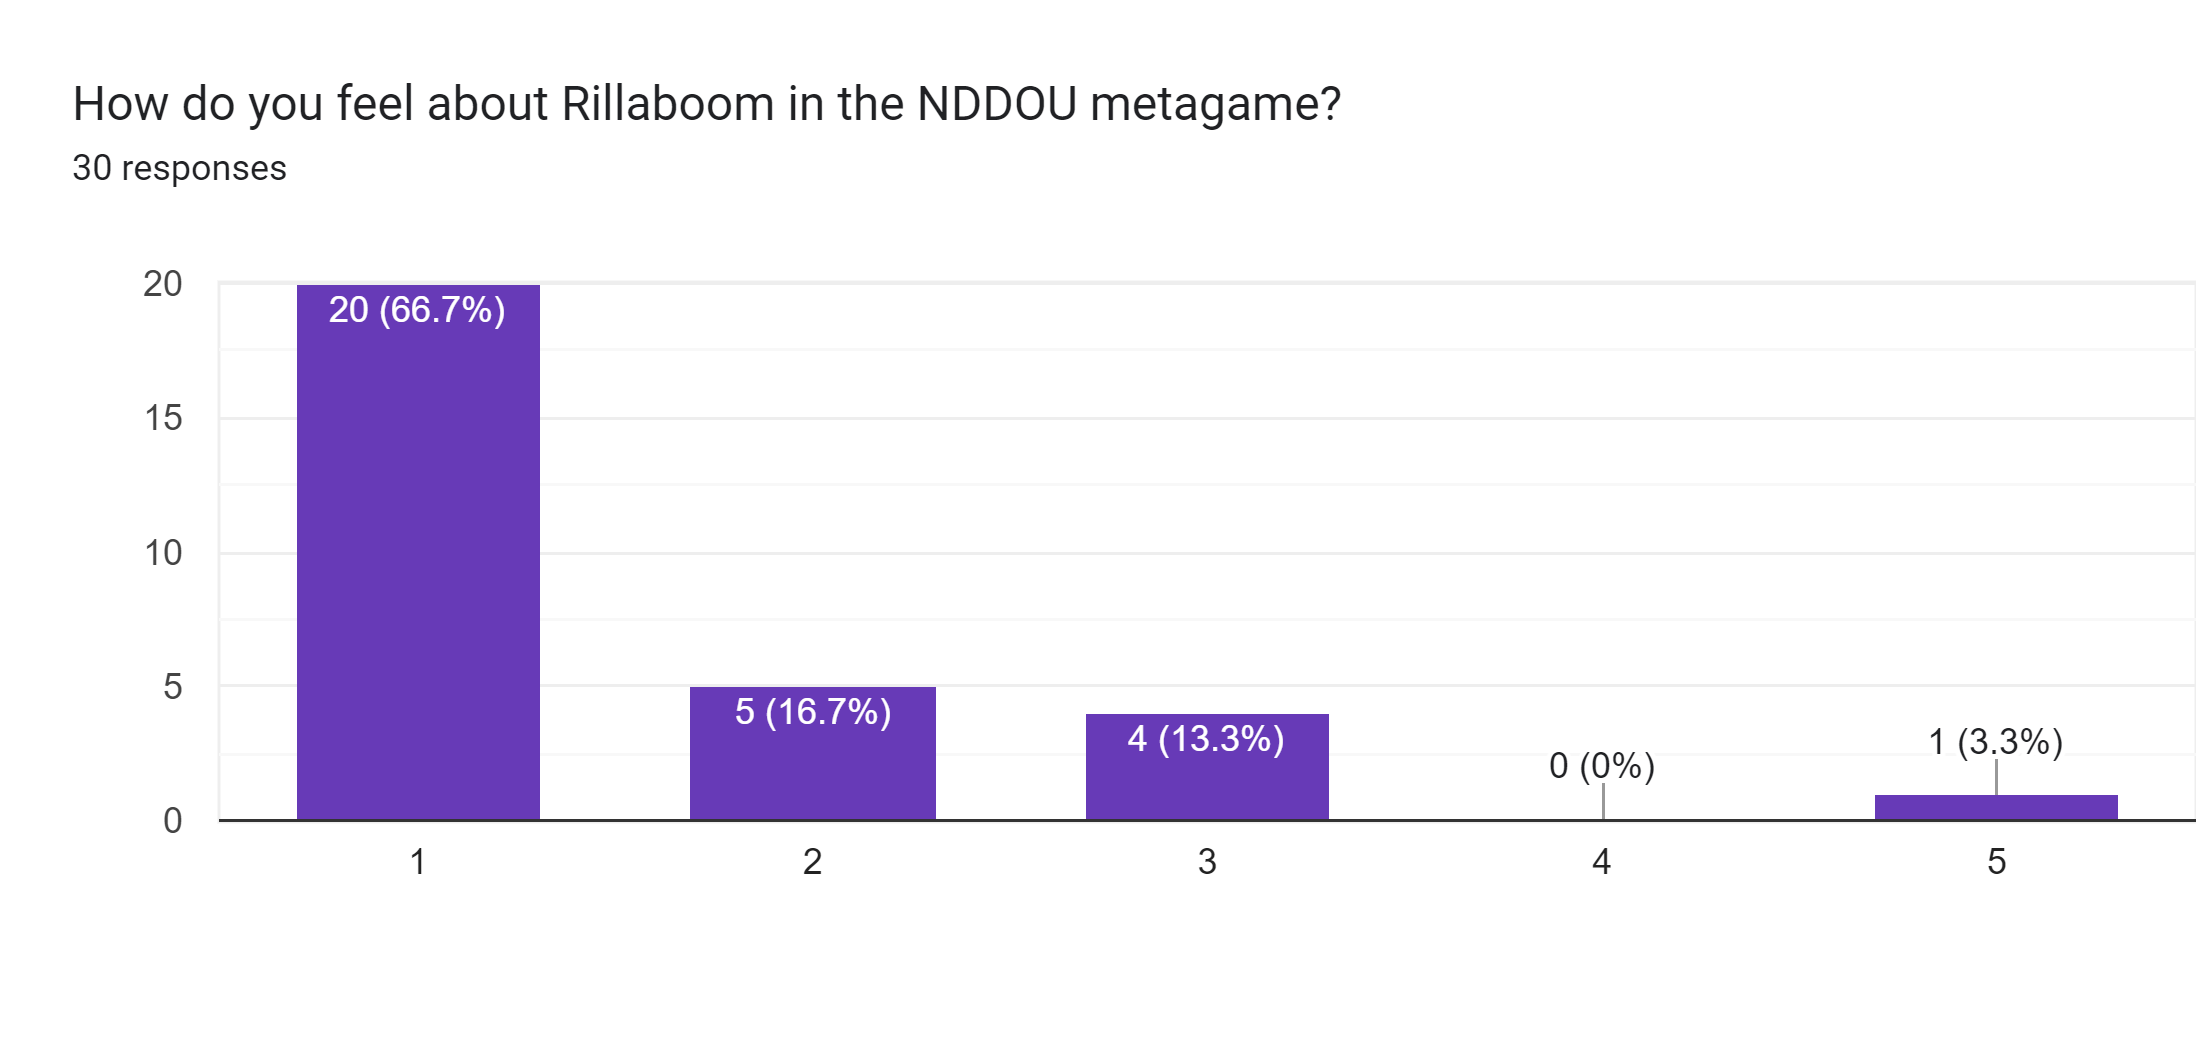 Forms response chart. Question title: How do you feel about Rillaboom in the NDDOU metagame?. Number of responses: 30 responses.